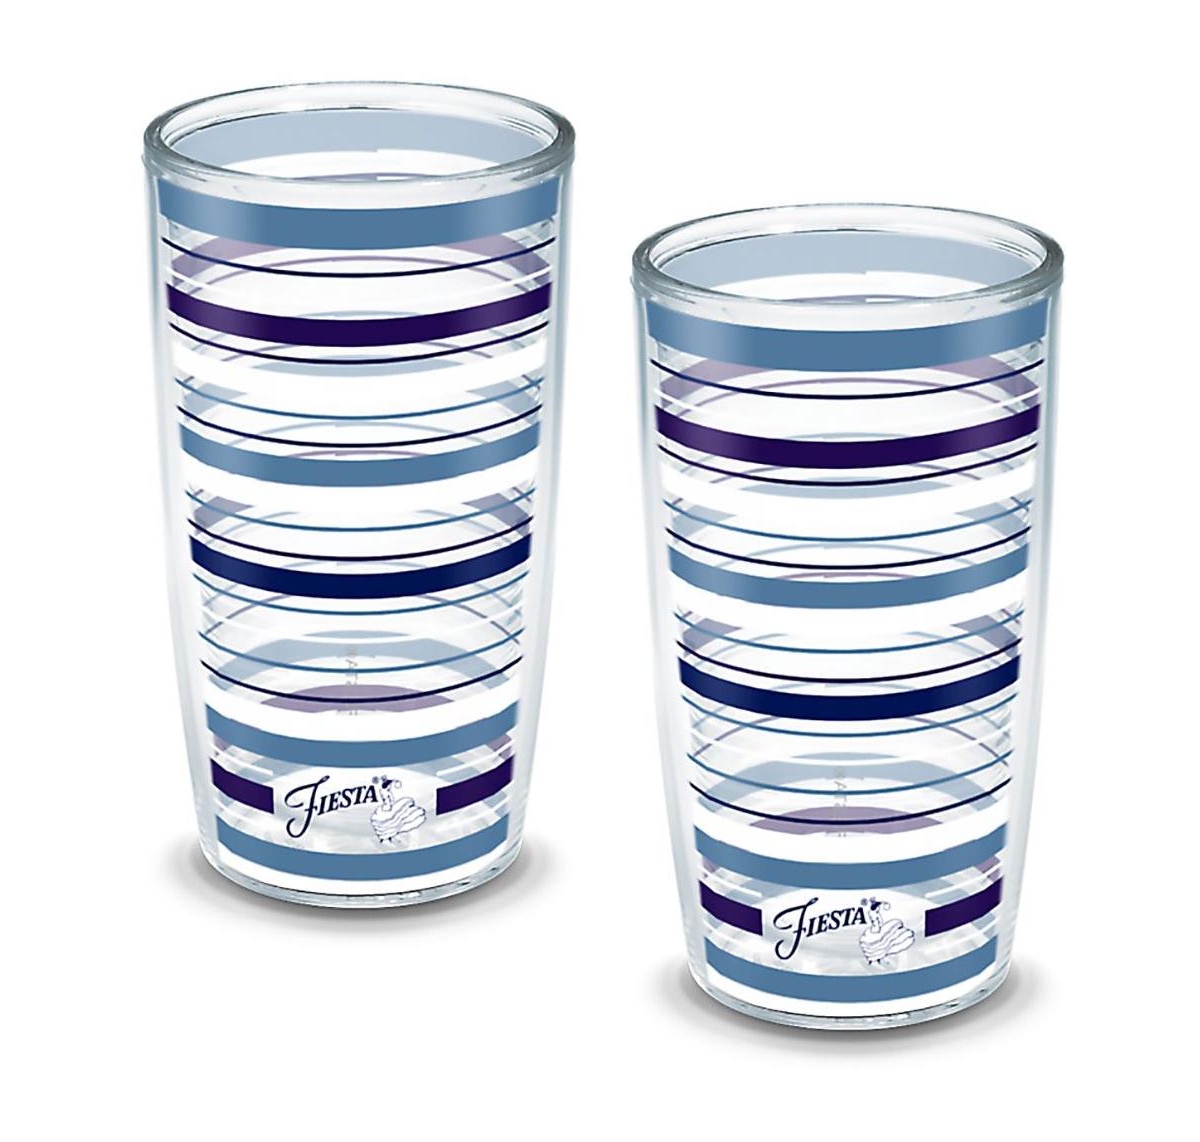 Tervis Tumbler Tervis Fiesta Lapis Stripes Made In Usa Double Walled Insulated Tumbler Cup Keeps Drinks Cold & Hot, In Open Miscellaneous